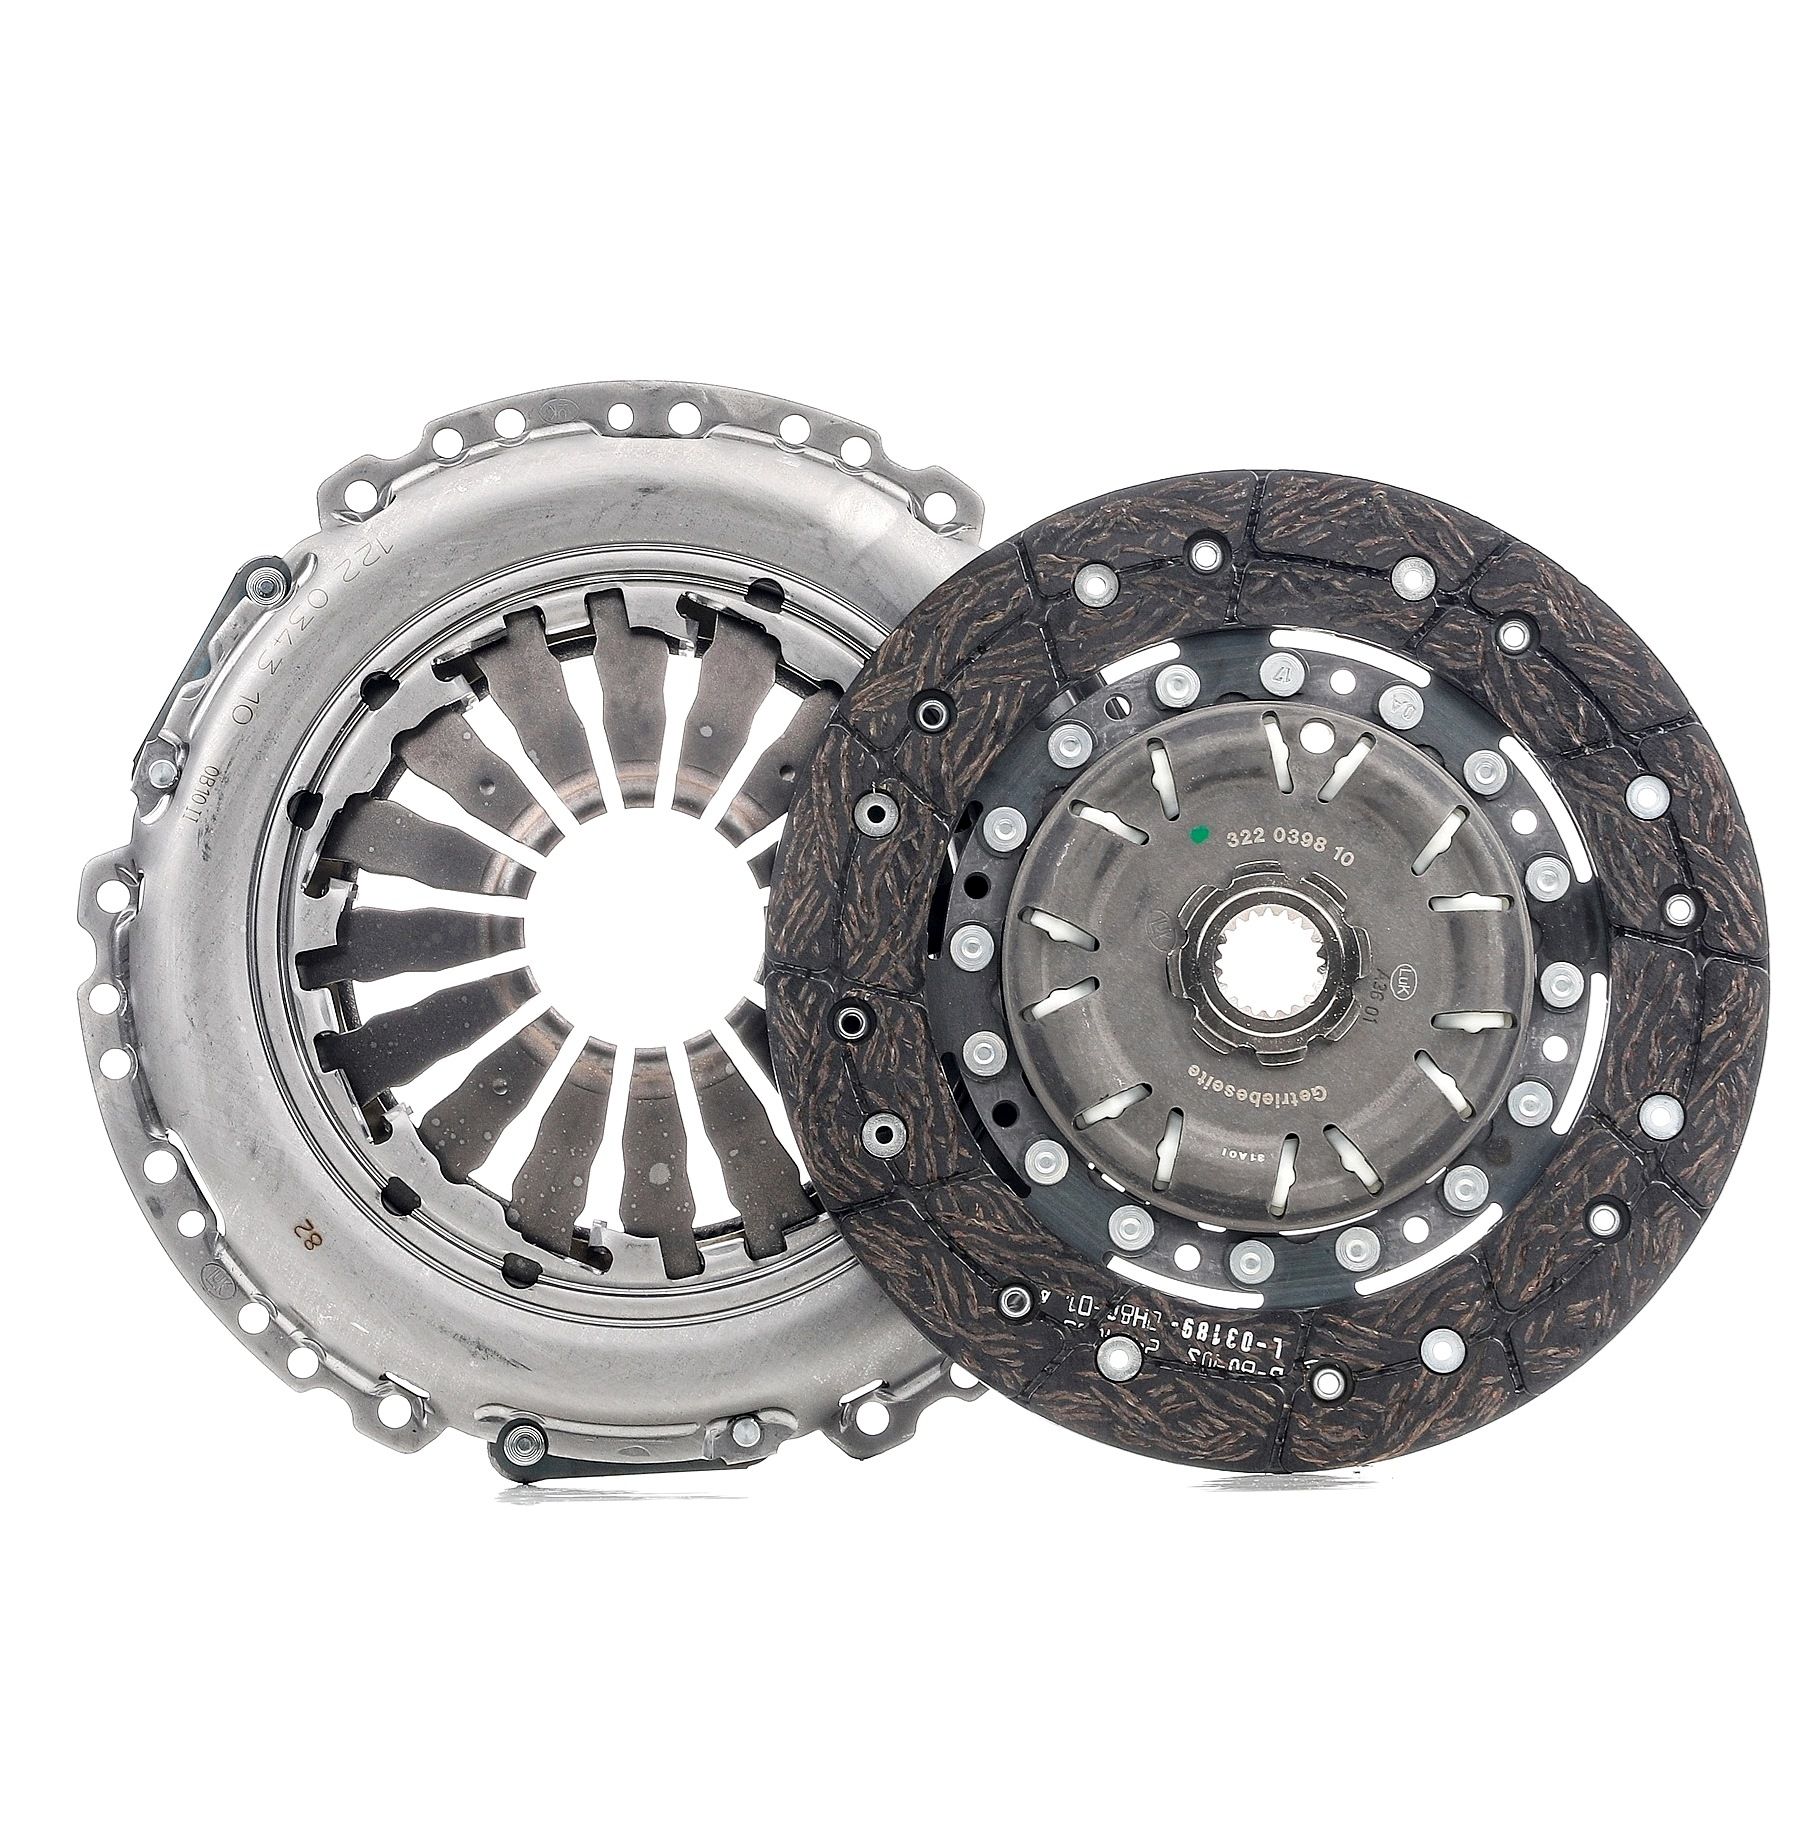 LuK BR 0222 622 3132 09 Clutch kit for engines with dual-mass flywheel, with clutch pressure plate, with clutch disc, without clutch release bearing, Check and replace dual-mass flywheel if necessary., 220mm